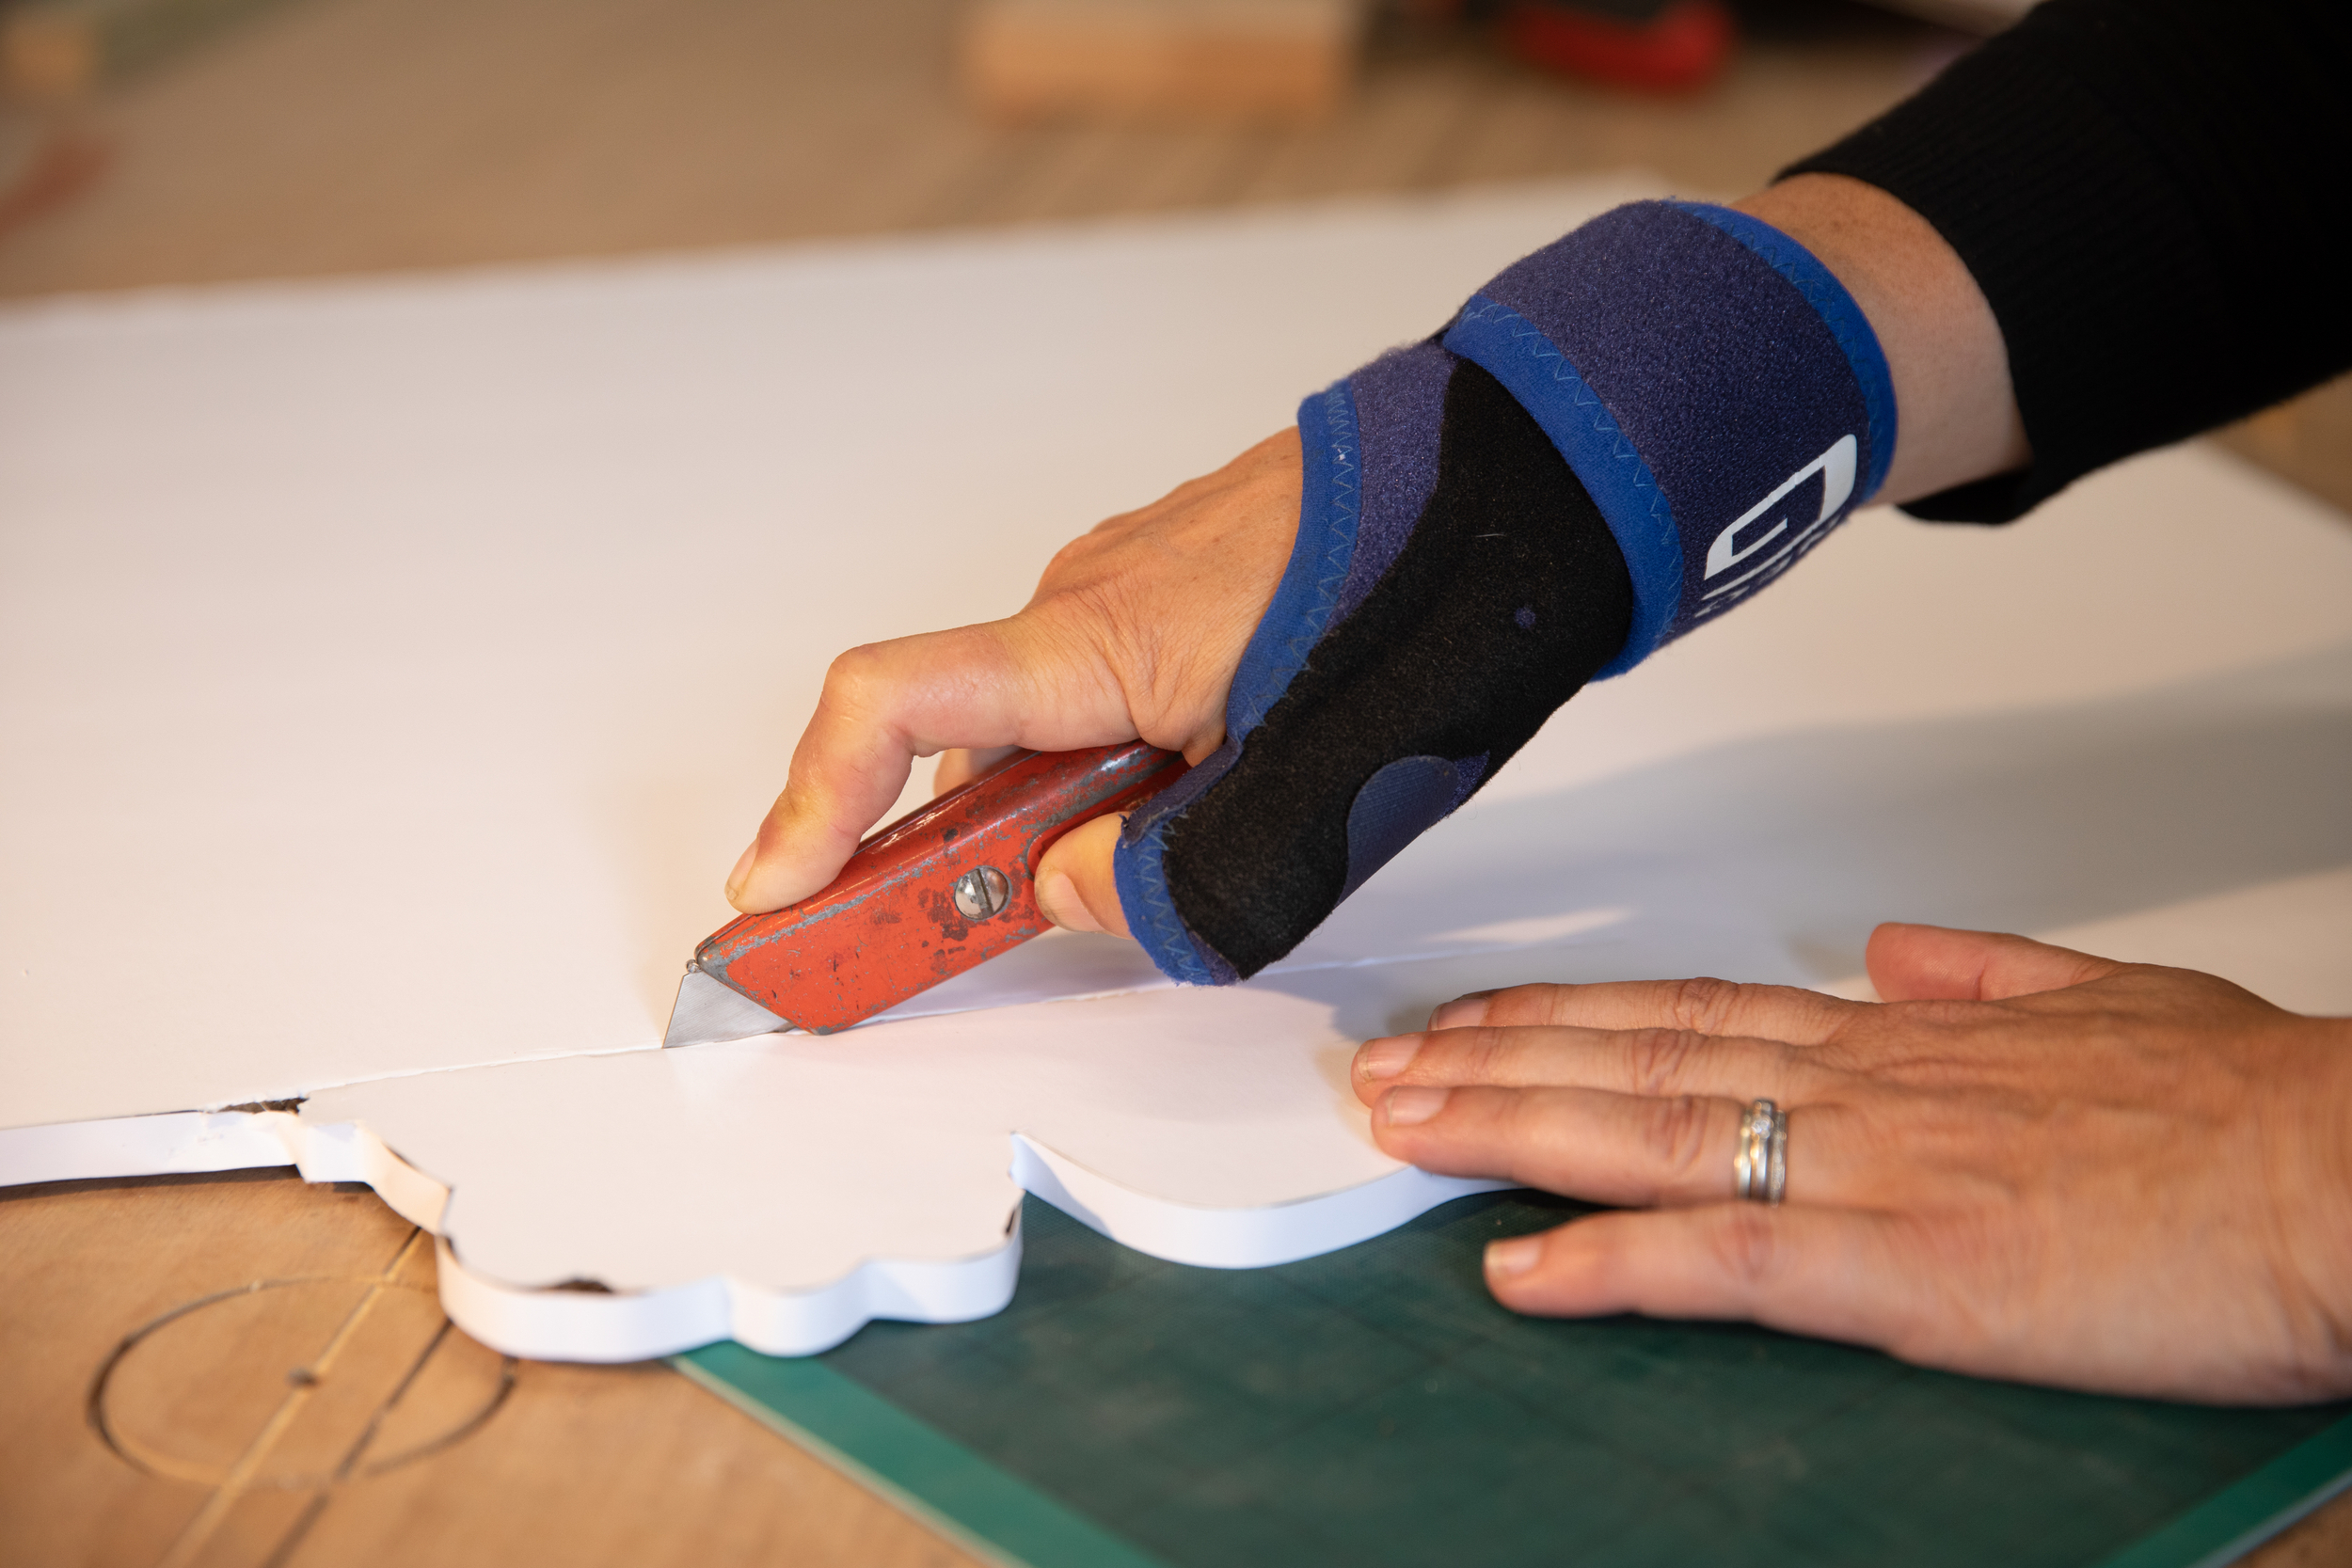 A hand with a wrist splint cuts a sheet of thick white card with a craft knife